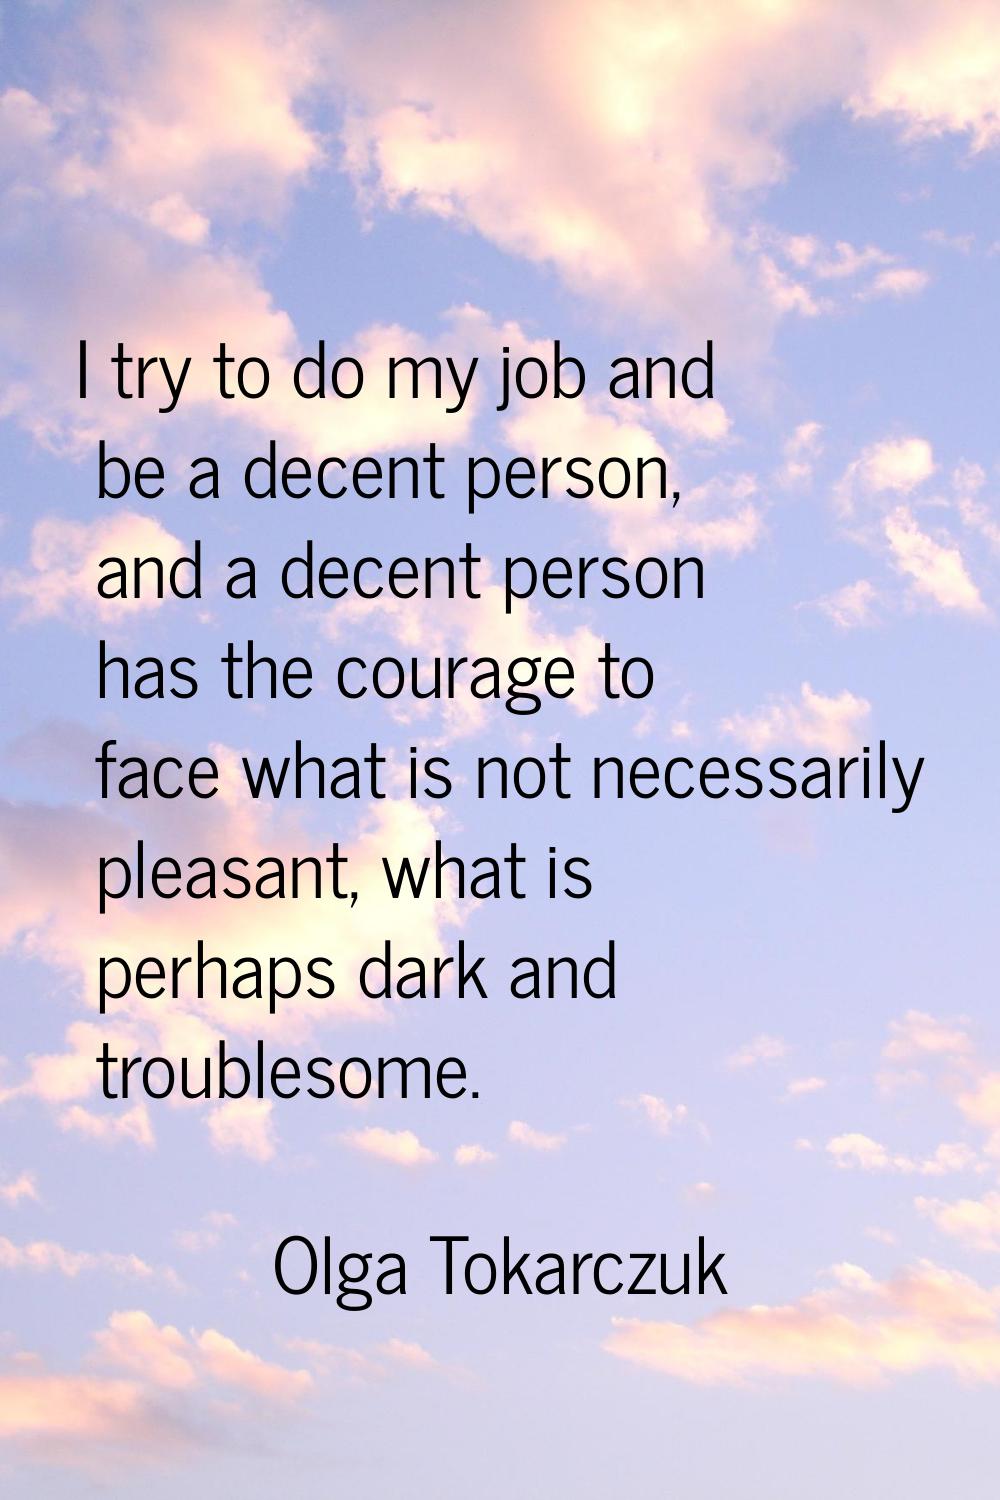 I try to do my job and be a decent person, and a decent person has the courage to face what is not 